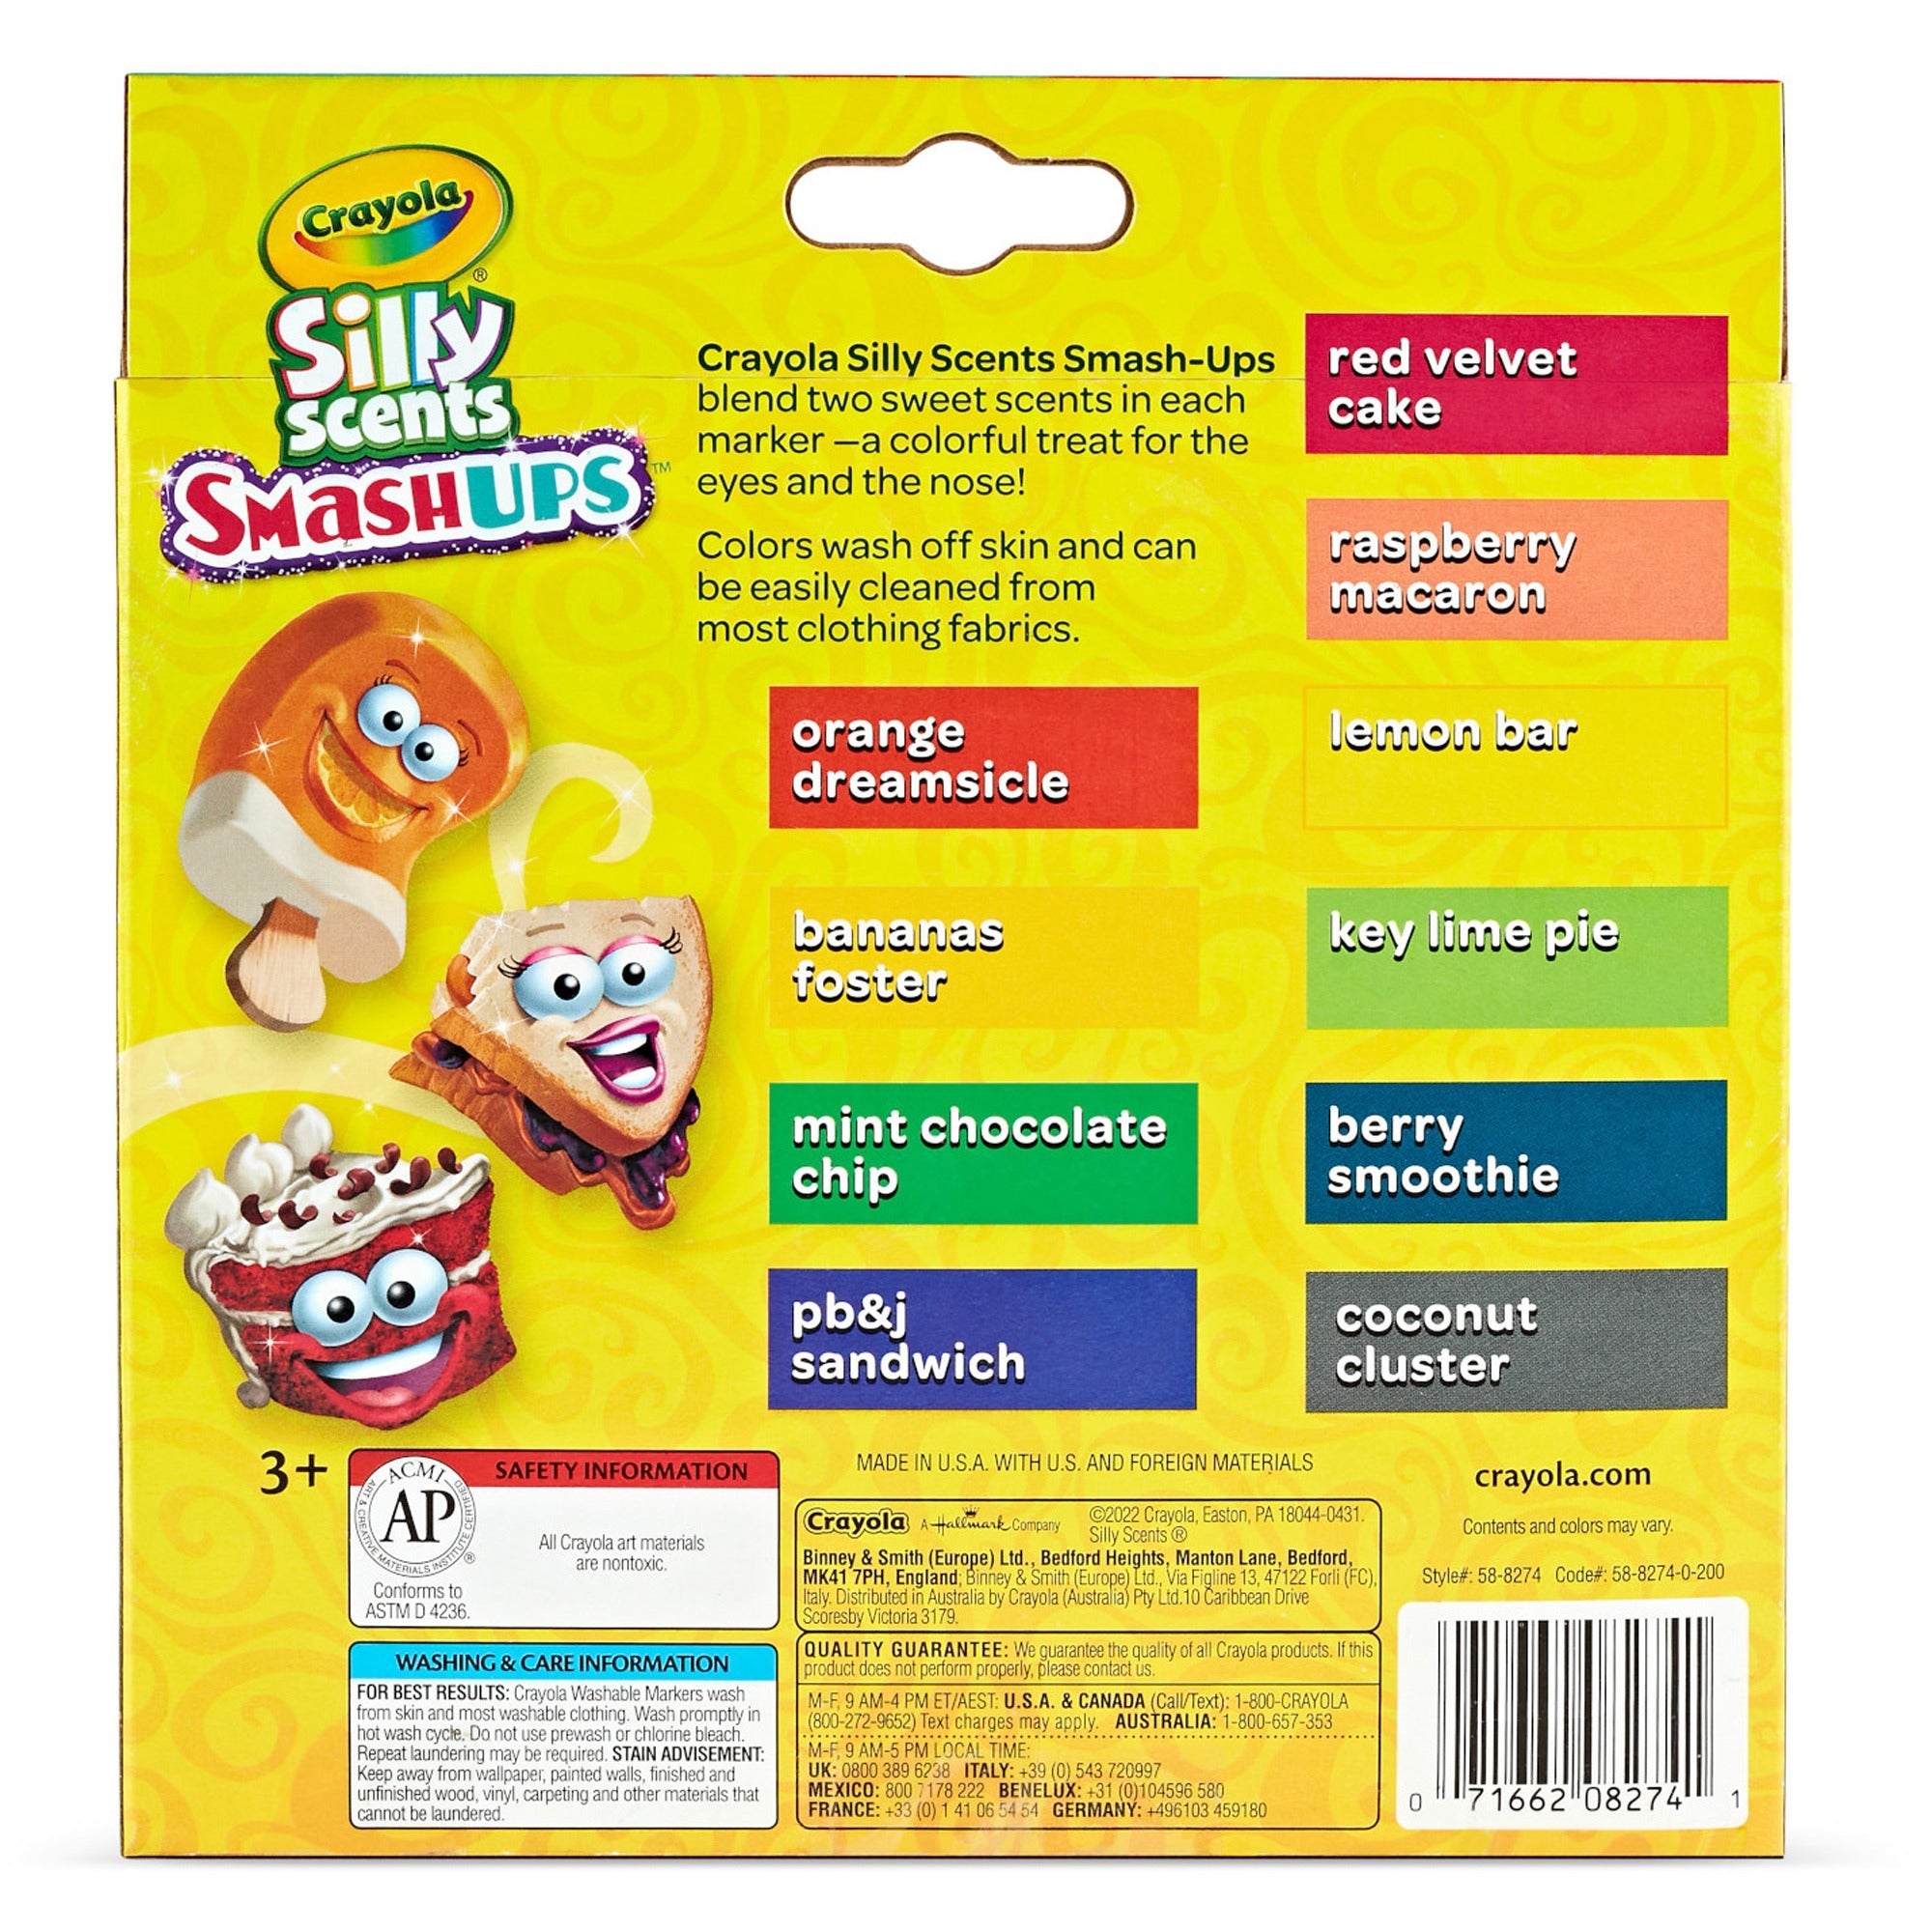 crayola-silly-scents-slim-scented-washable-markers-broad-marker-point-1-pack_cyo588274 - 4